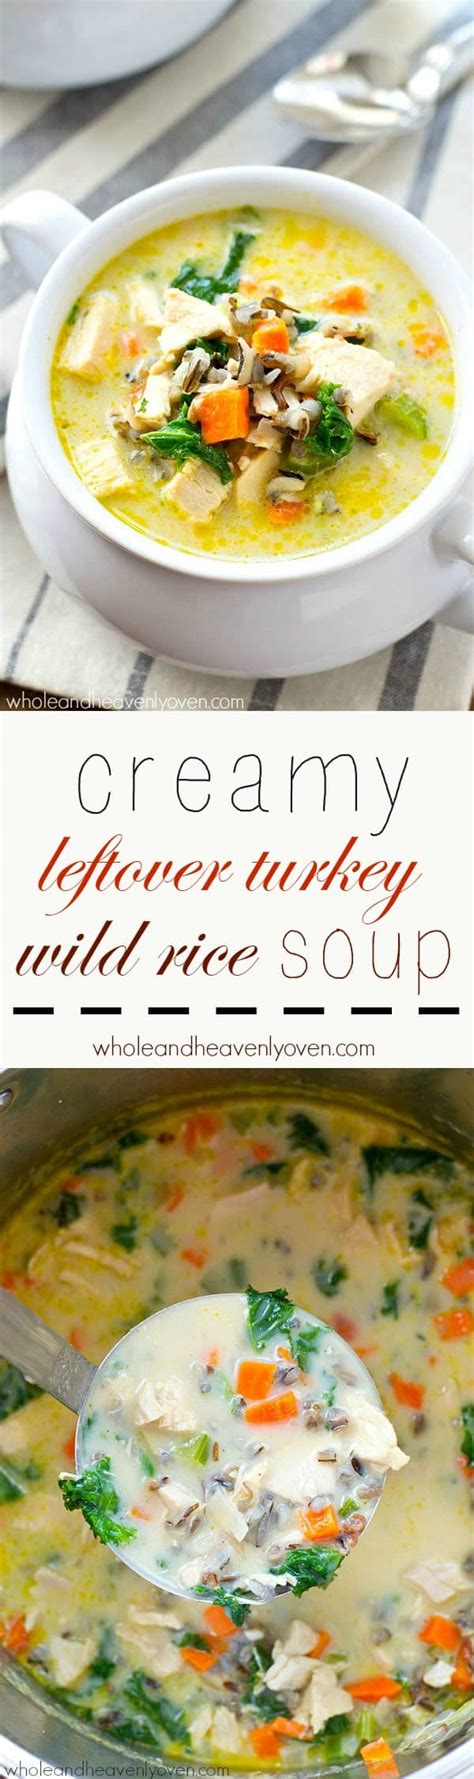 This leftover turkey cornbread casserole is the perfect way to use up your thanksgiving leftovers. Creamy Leftover Turkey Wild Rice Soup - Whole and Heavenly ...